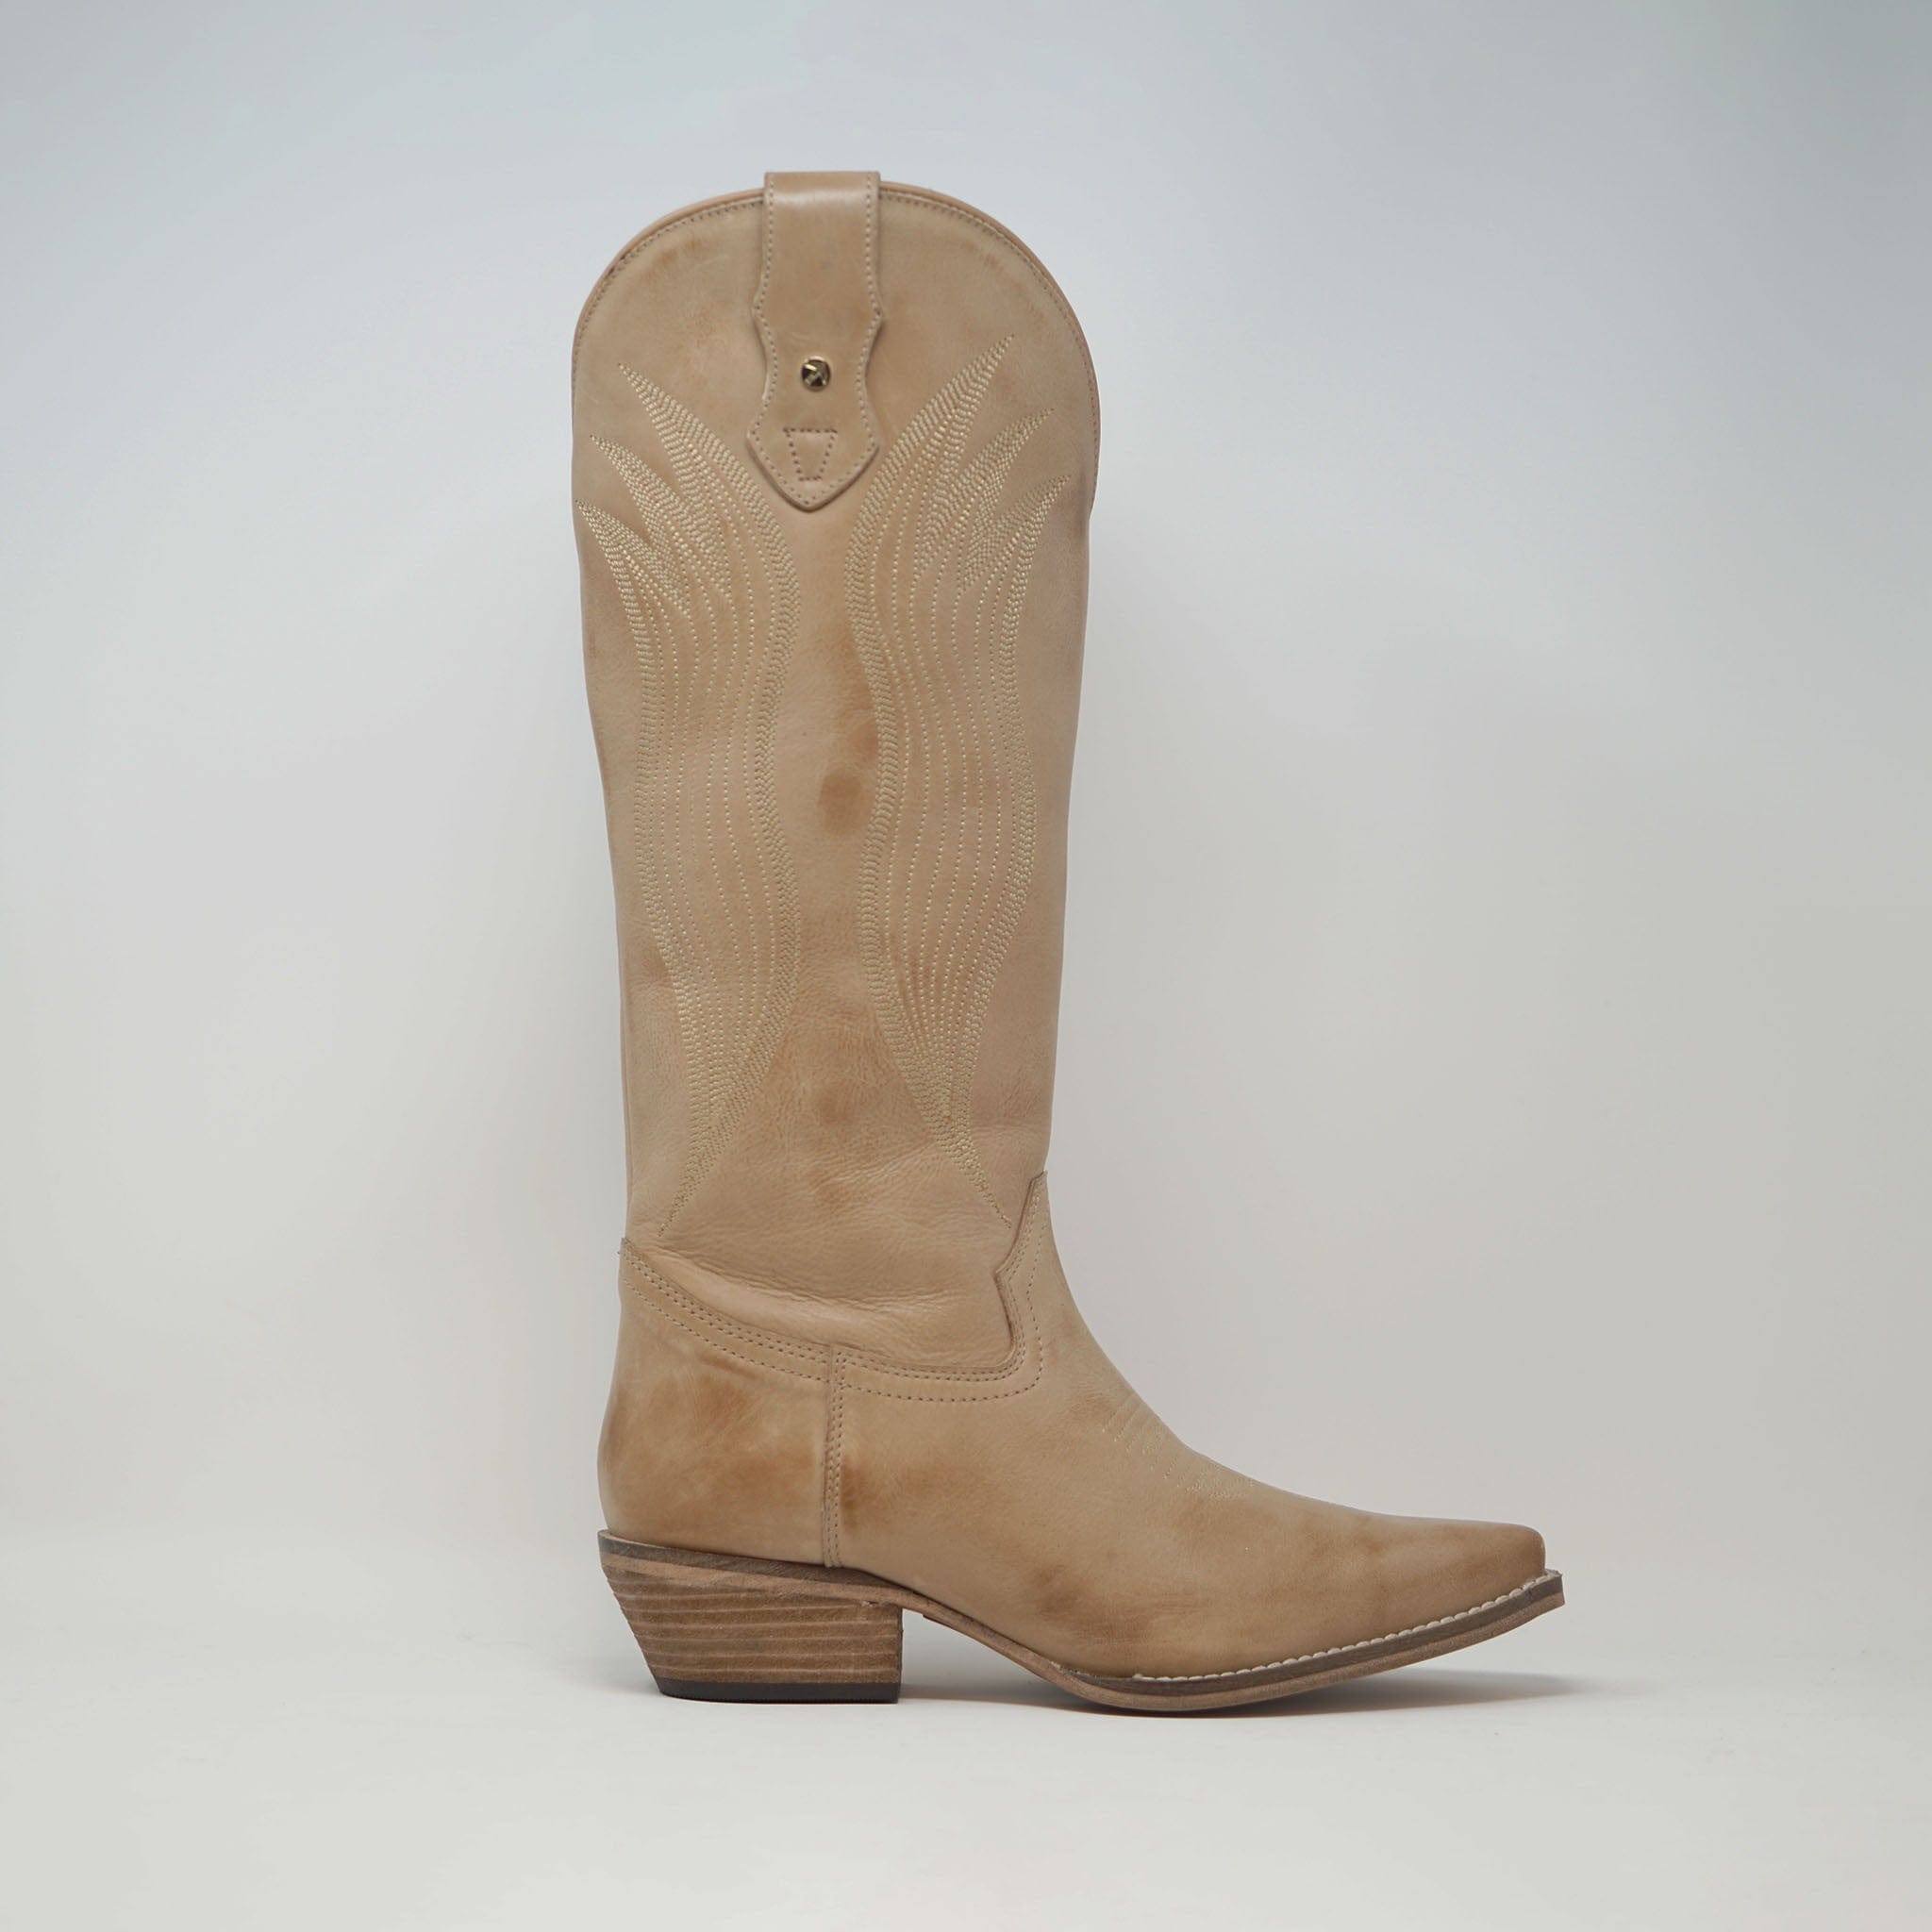 Ravel Dolly Camel Leather Mid Calf Cowboy Boots BOOTS  - ZIGZAG Footwear